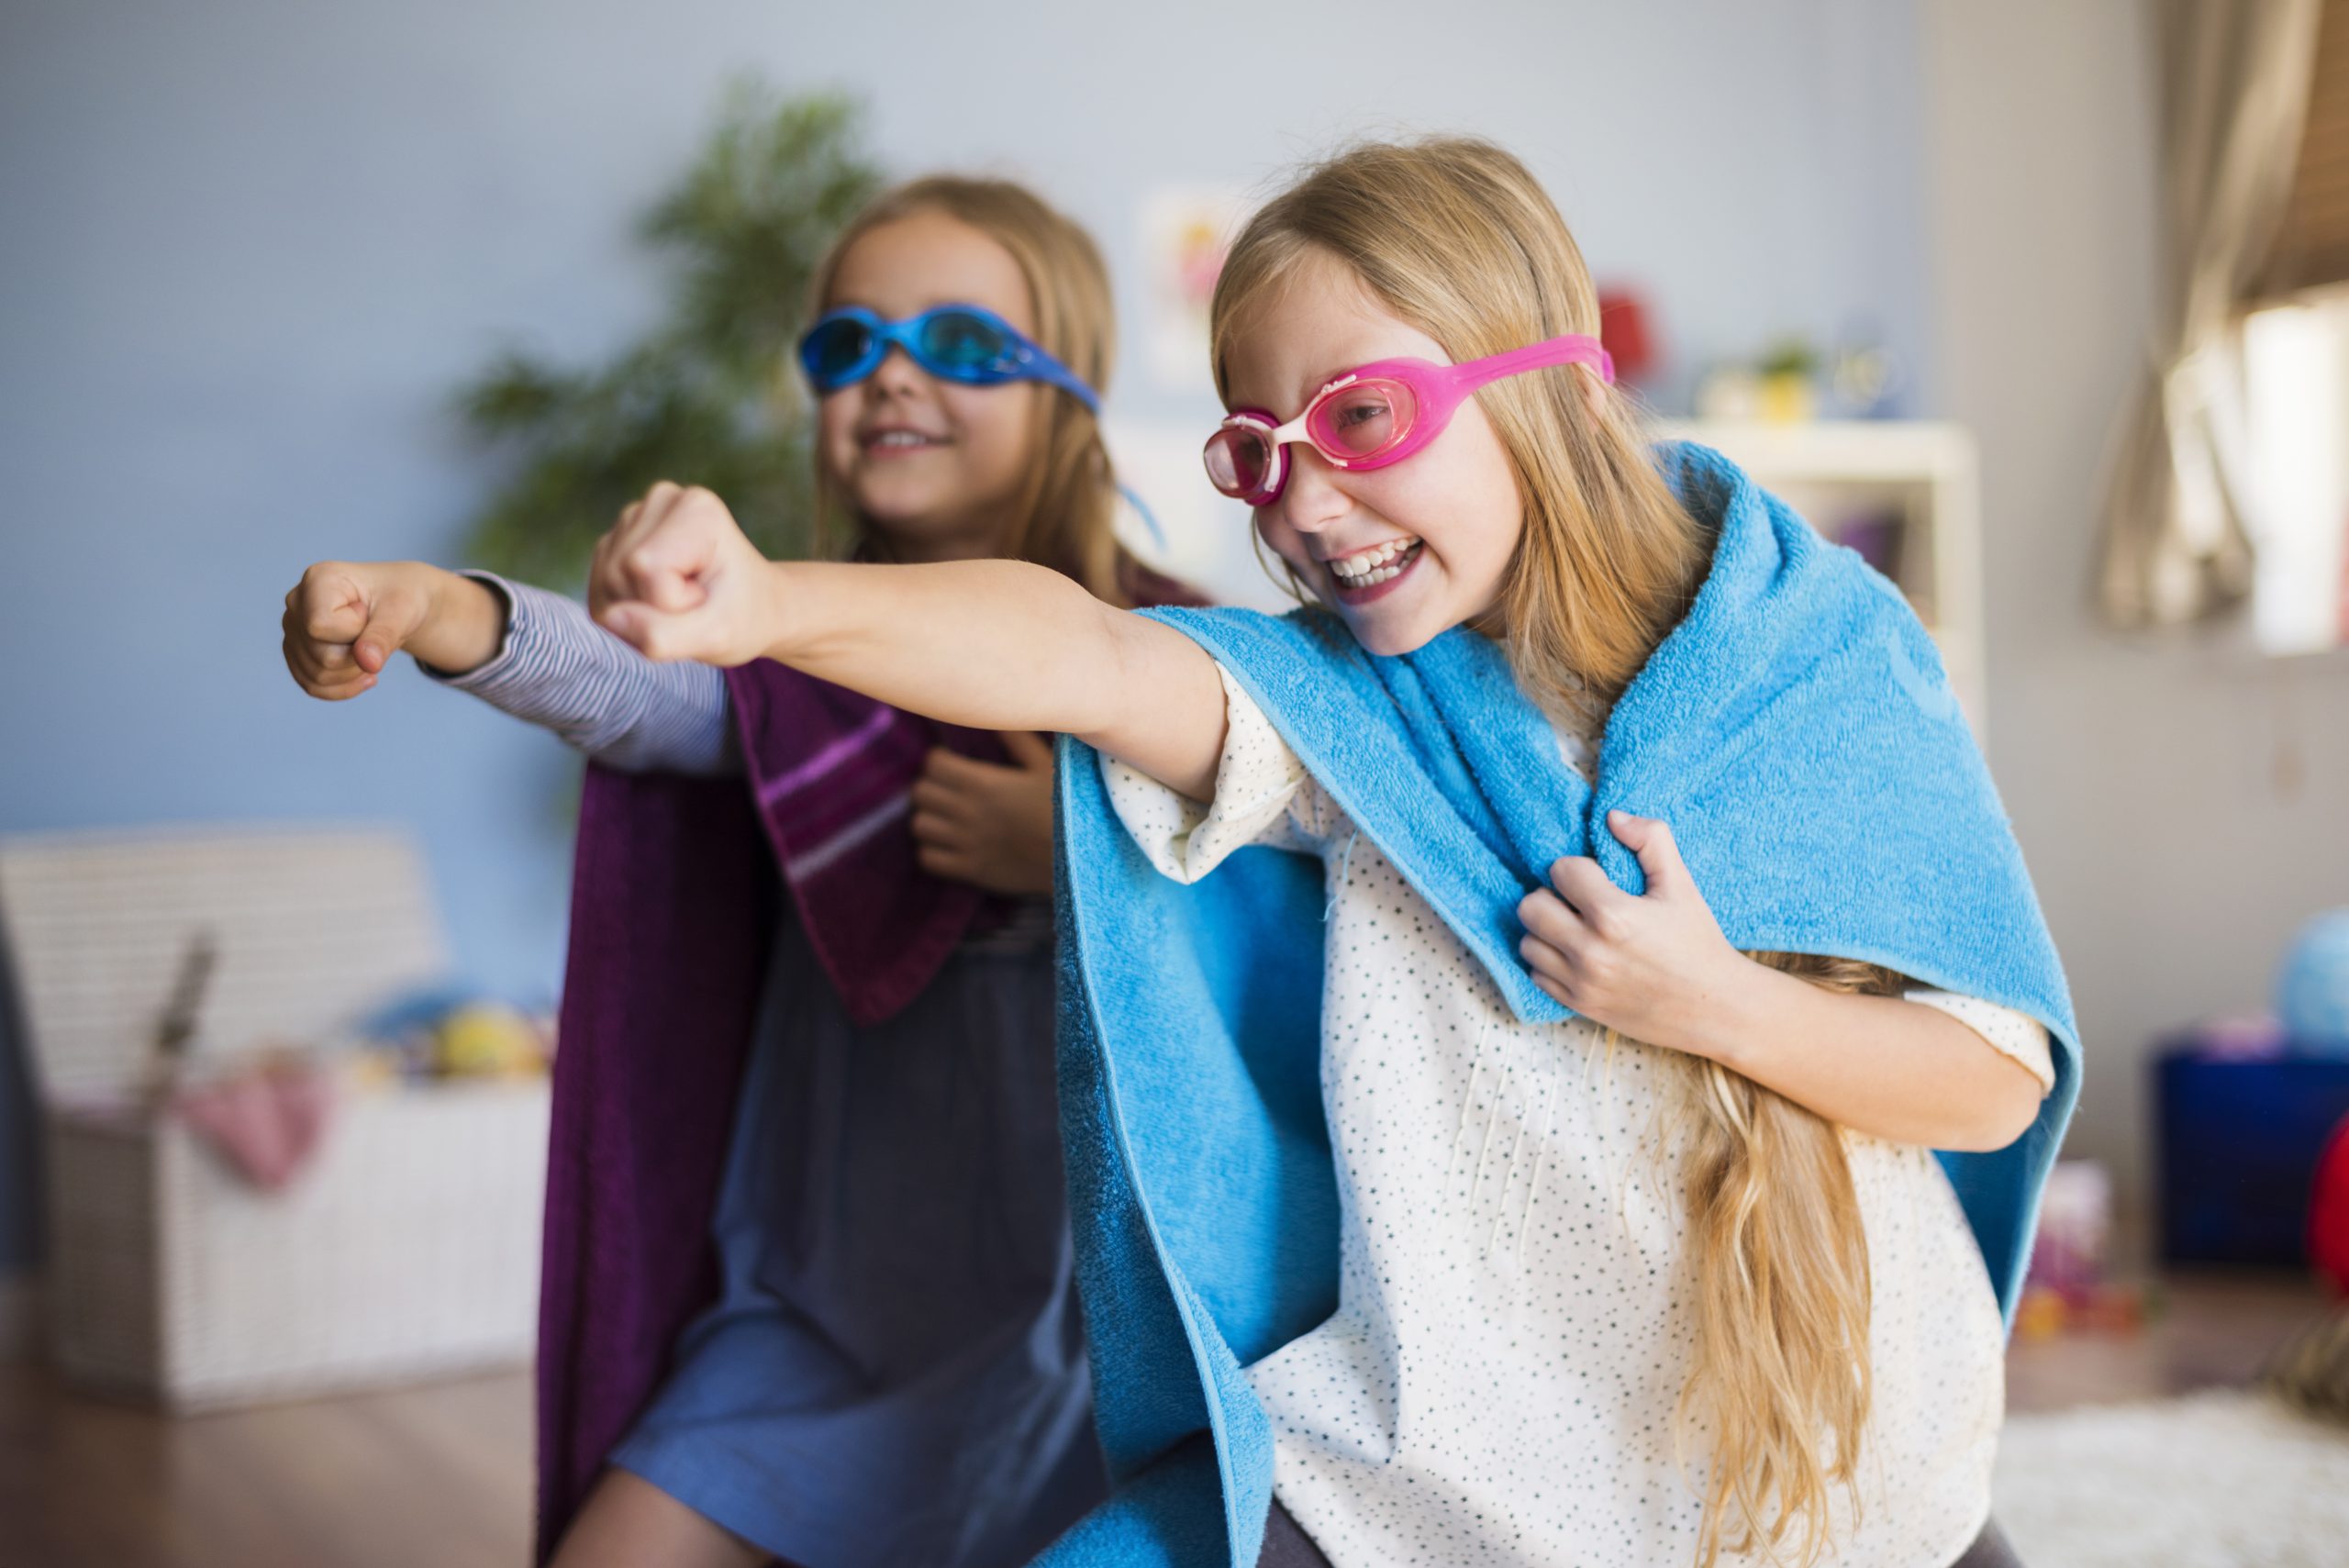 Two joyful children in goggles and capes play pretend as superheroes indoors. 